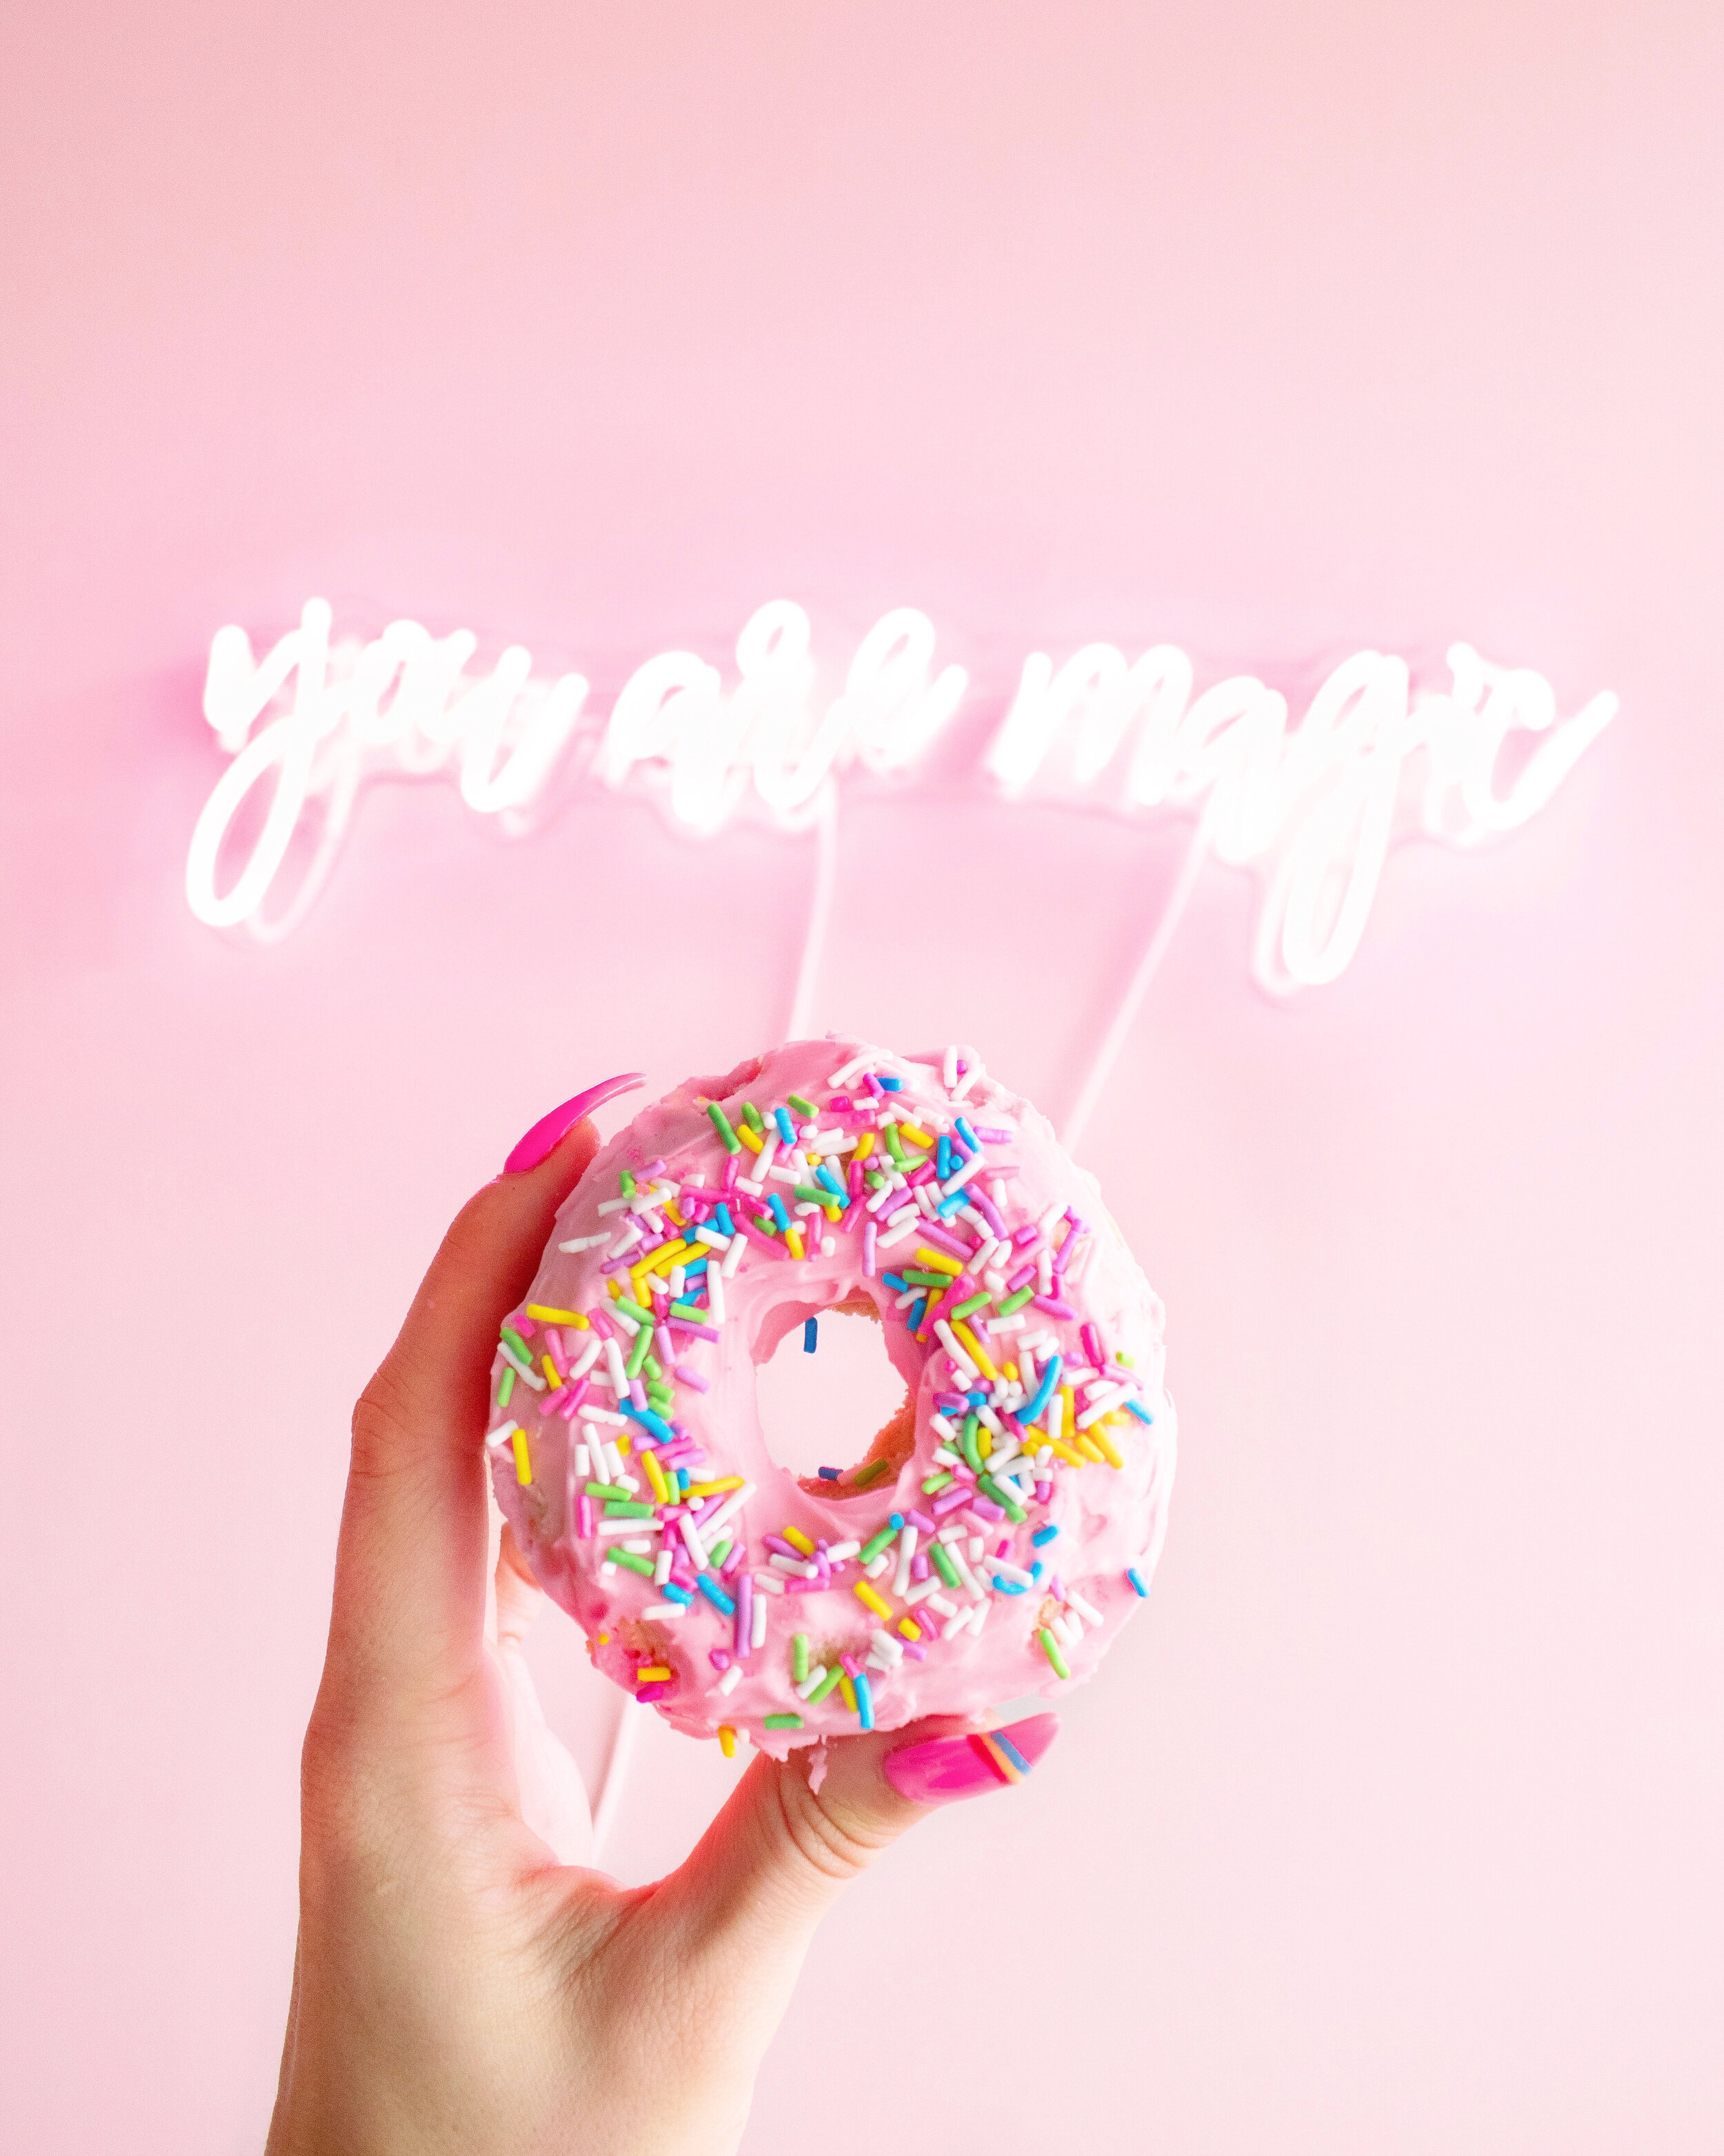 Canva - Woman Holding Donut with Sprinkles.jpg